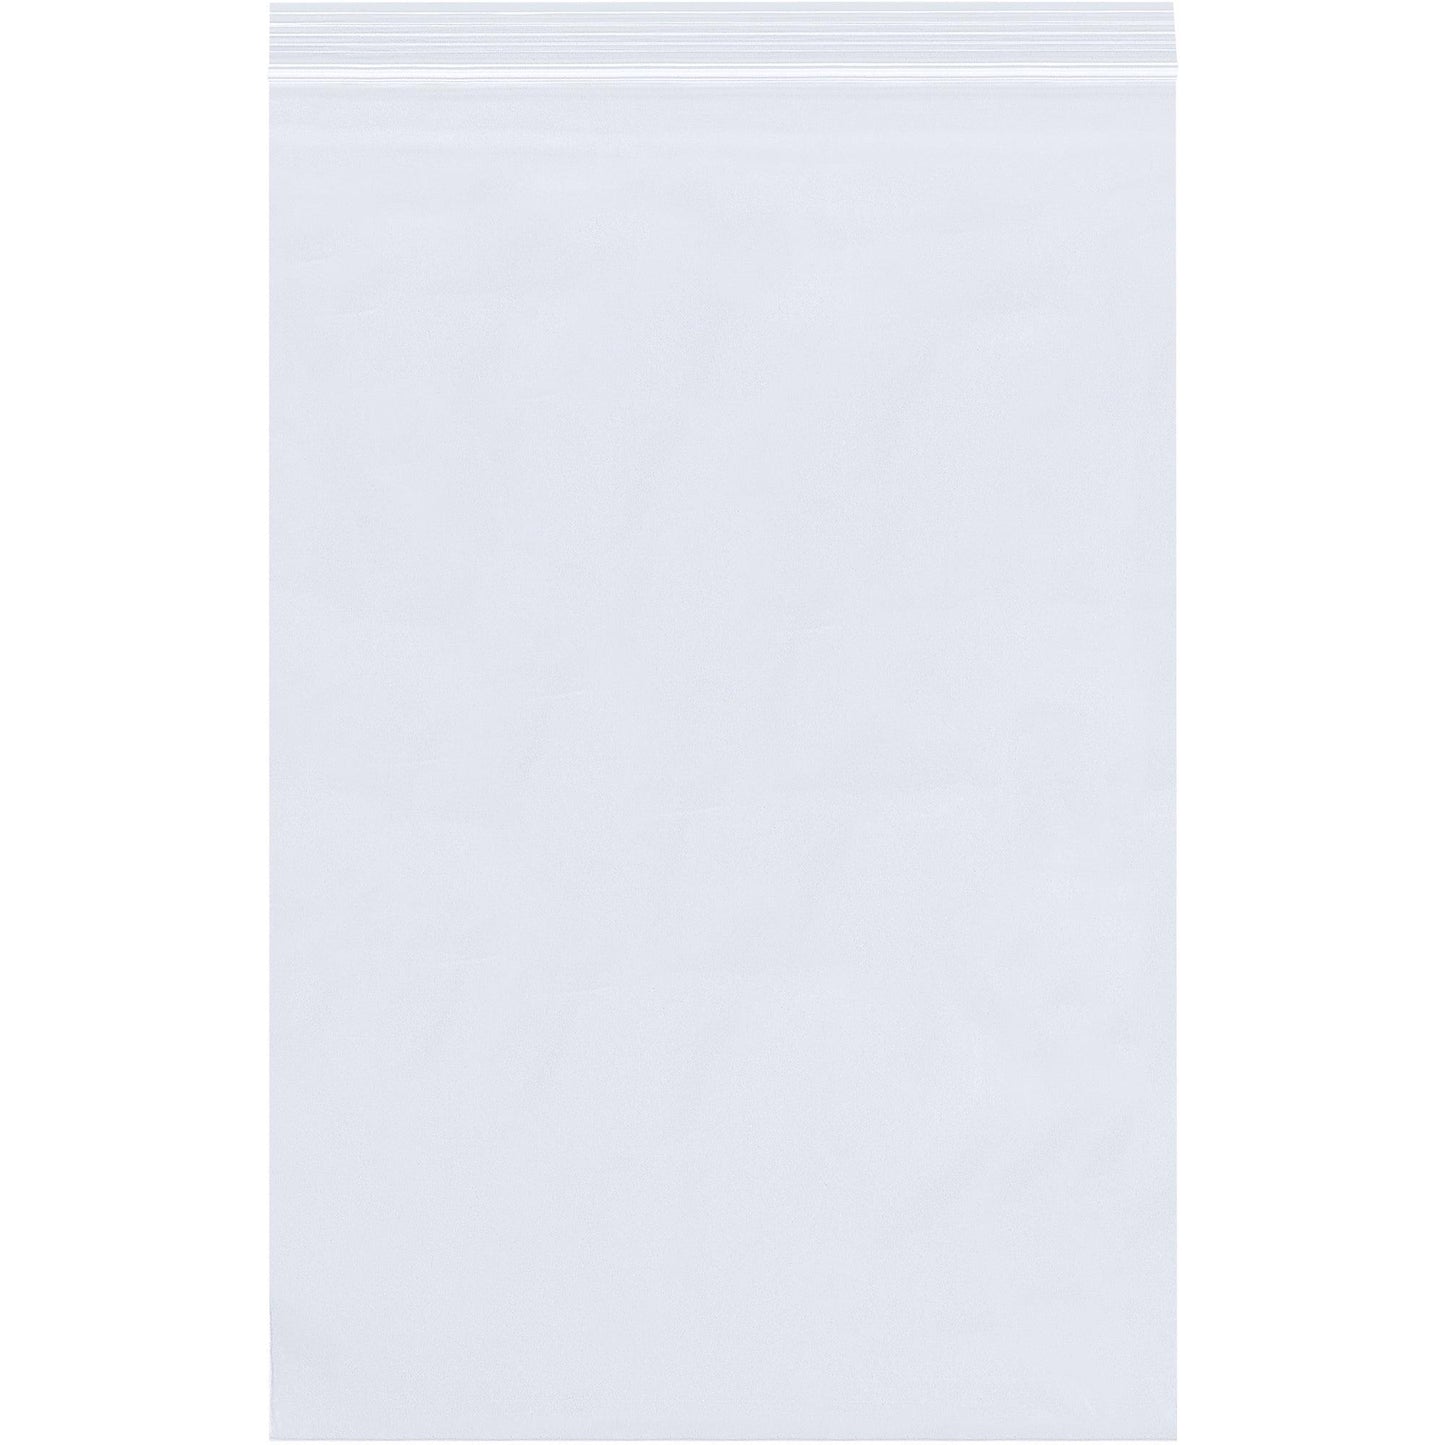 10 x 24" - 2 Mil Reclosable Poly Bags - PB4096